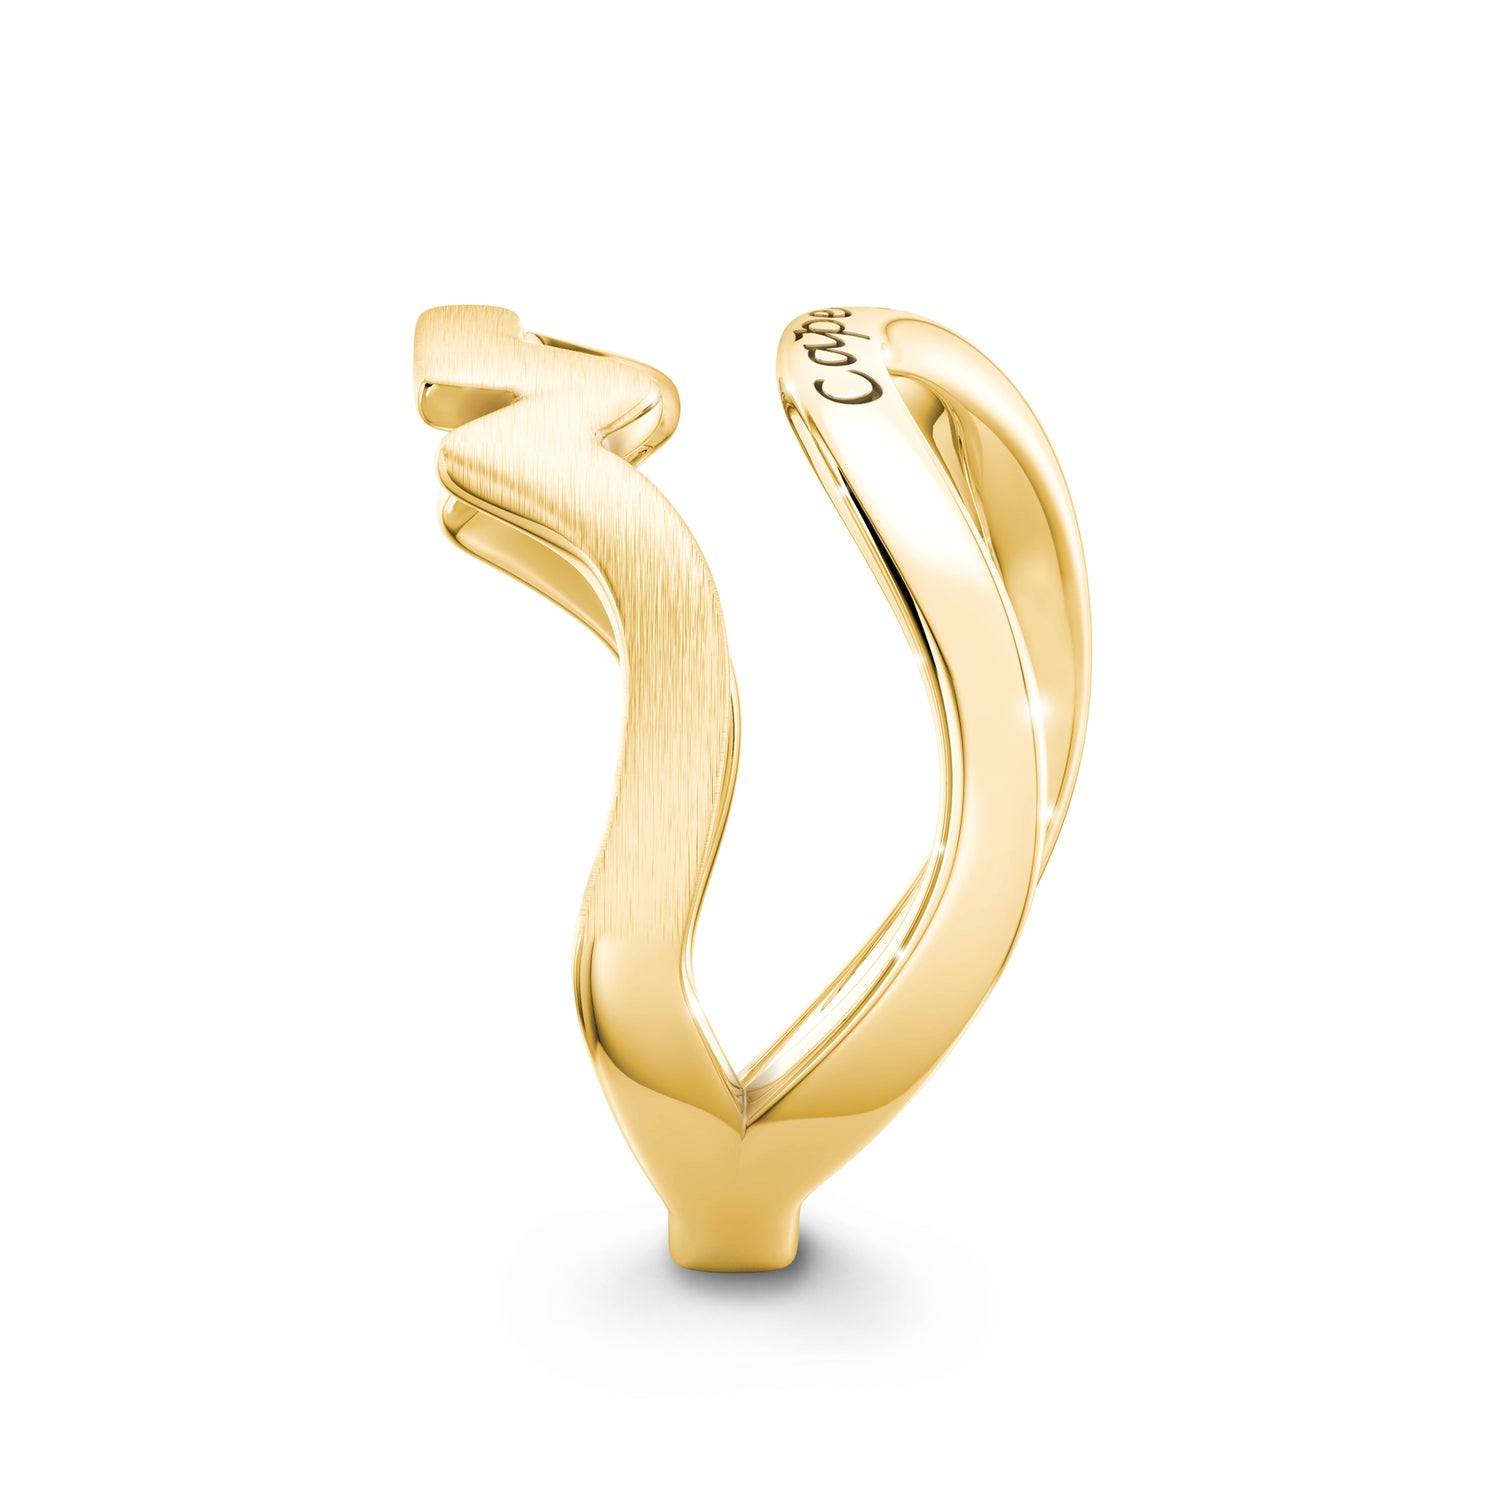 Swiss Set Cape Town Ring in 14k yellow gold 